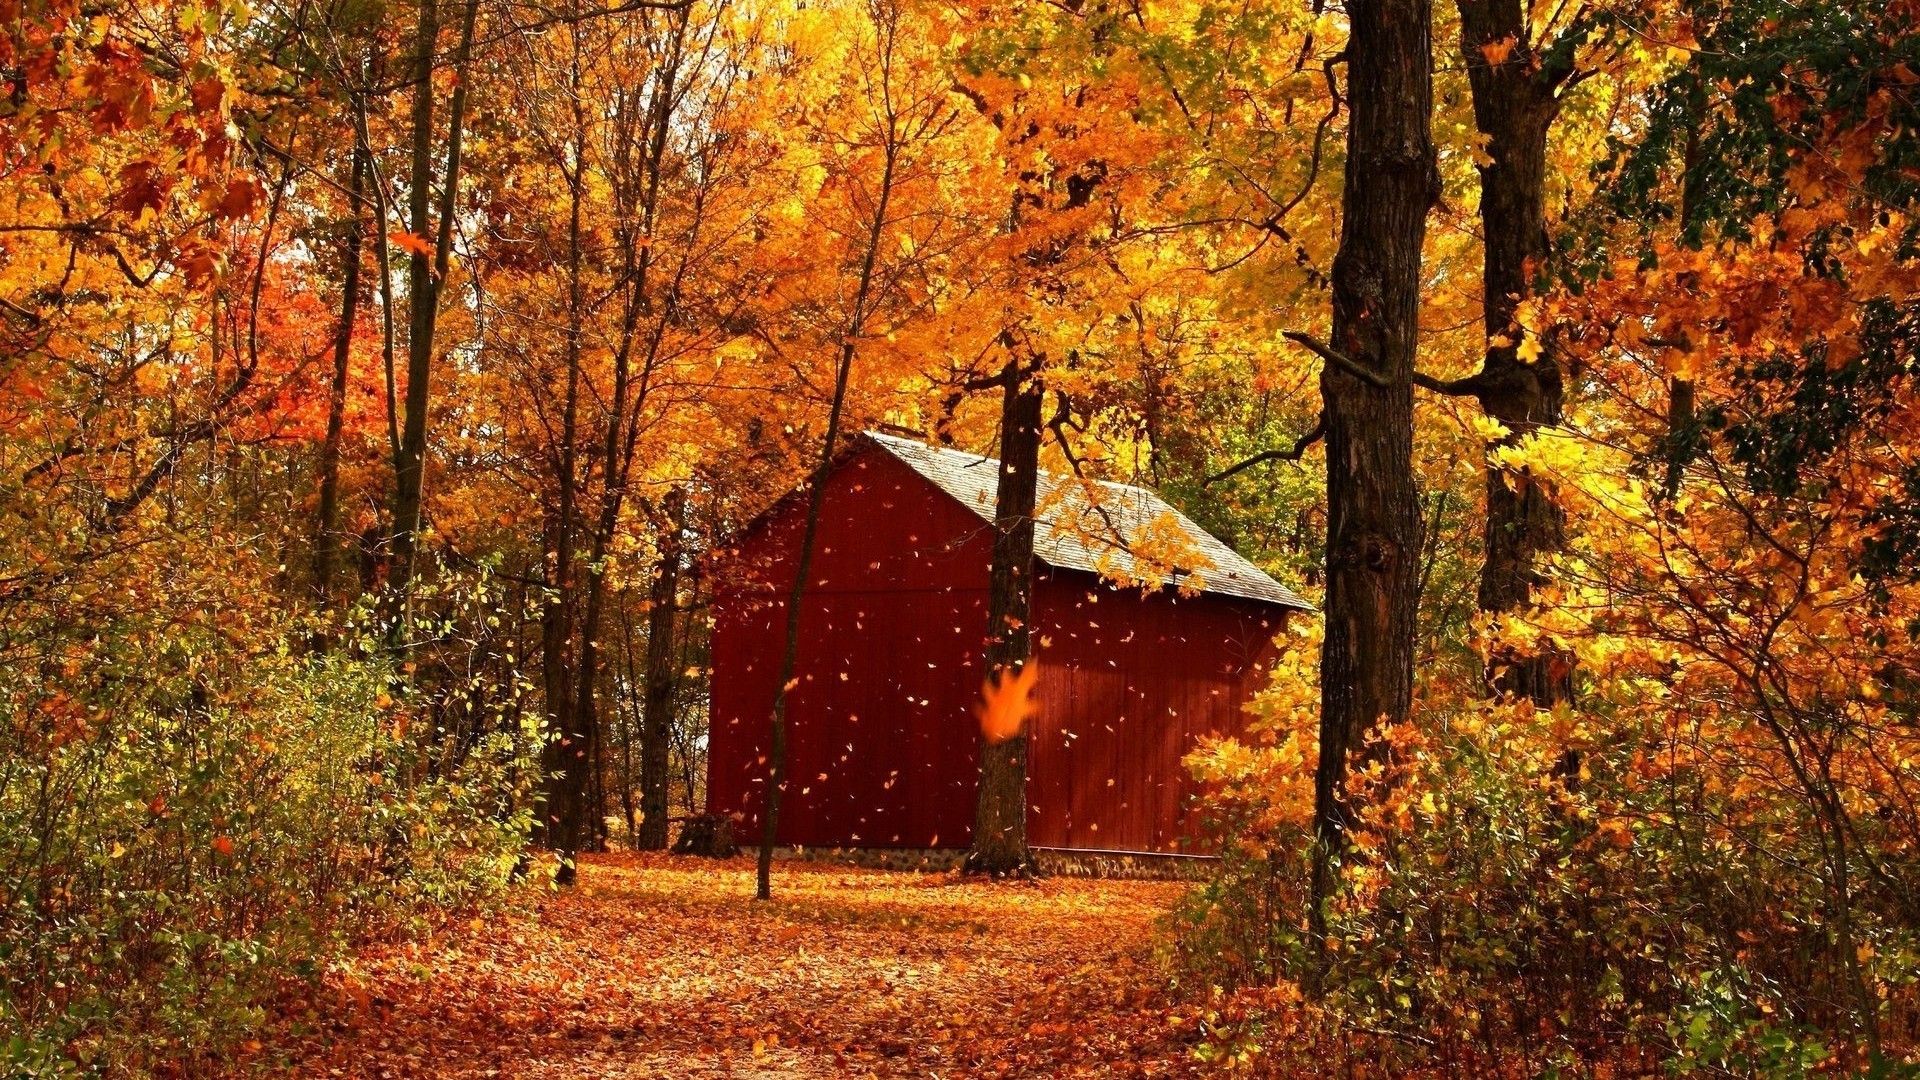 Download Red barn in autumn forest wallpaper 928 - Autumn Red Colored Forest Wallpaper